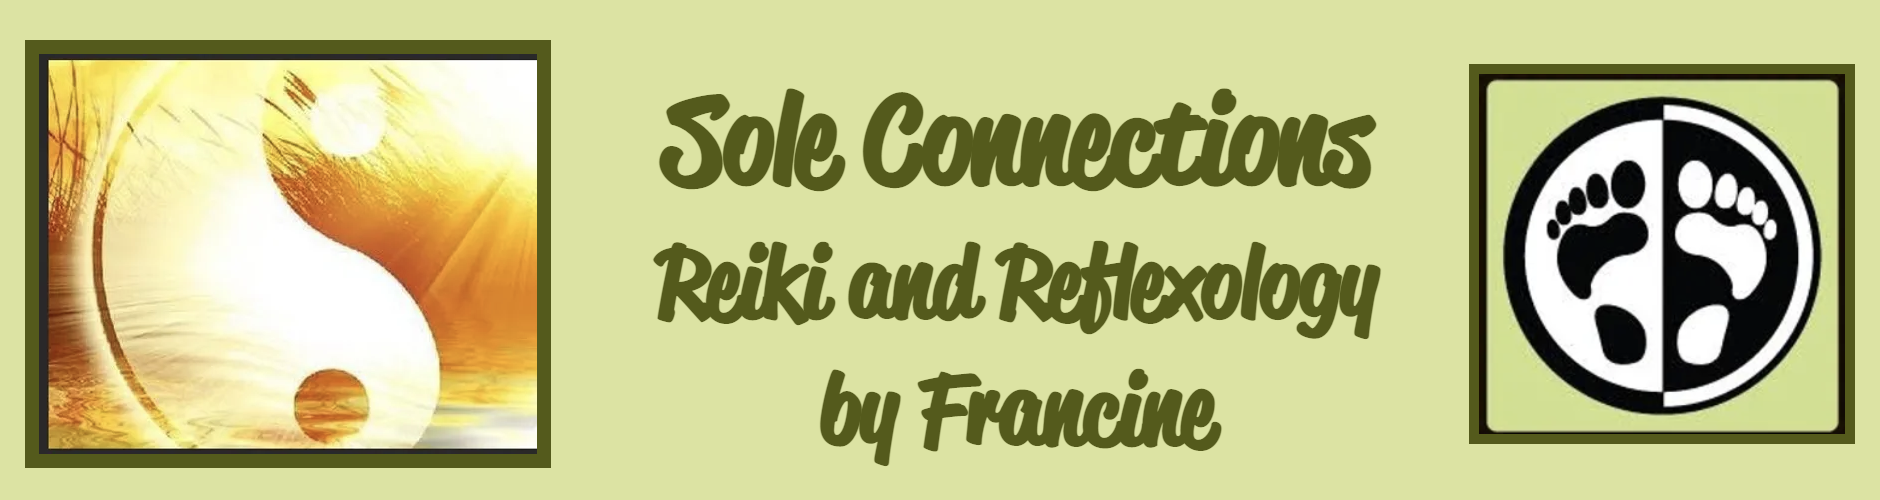 Sole Connections